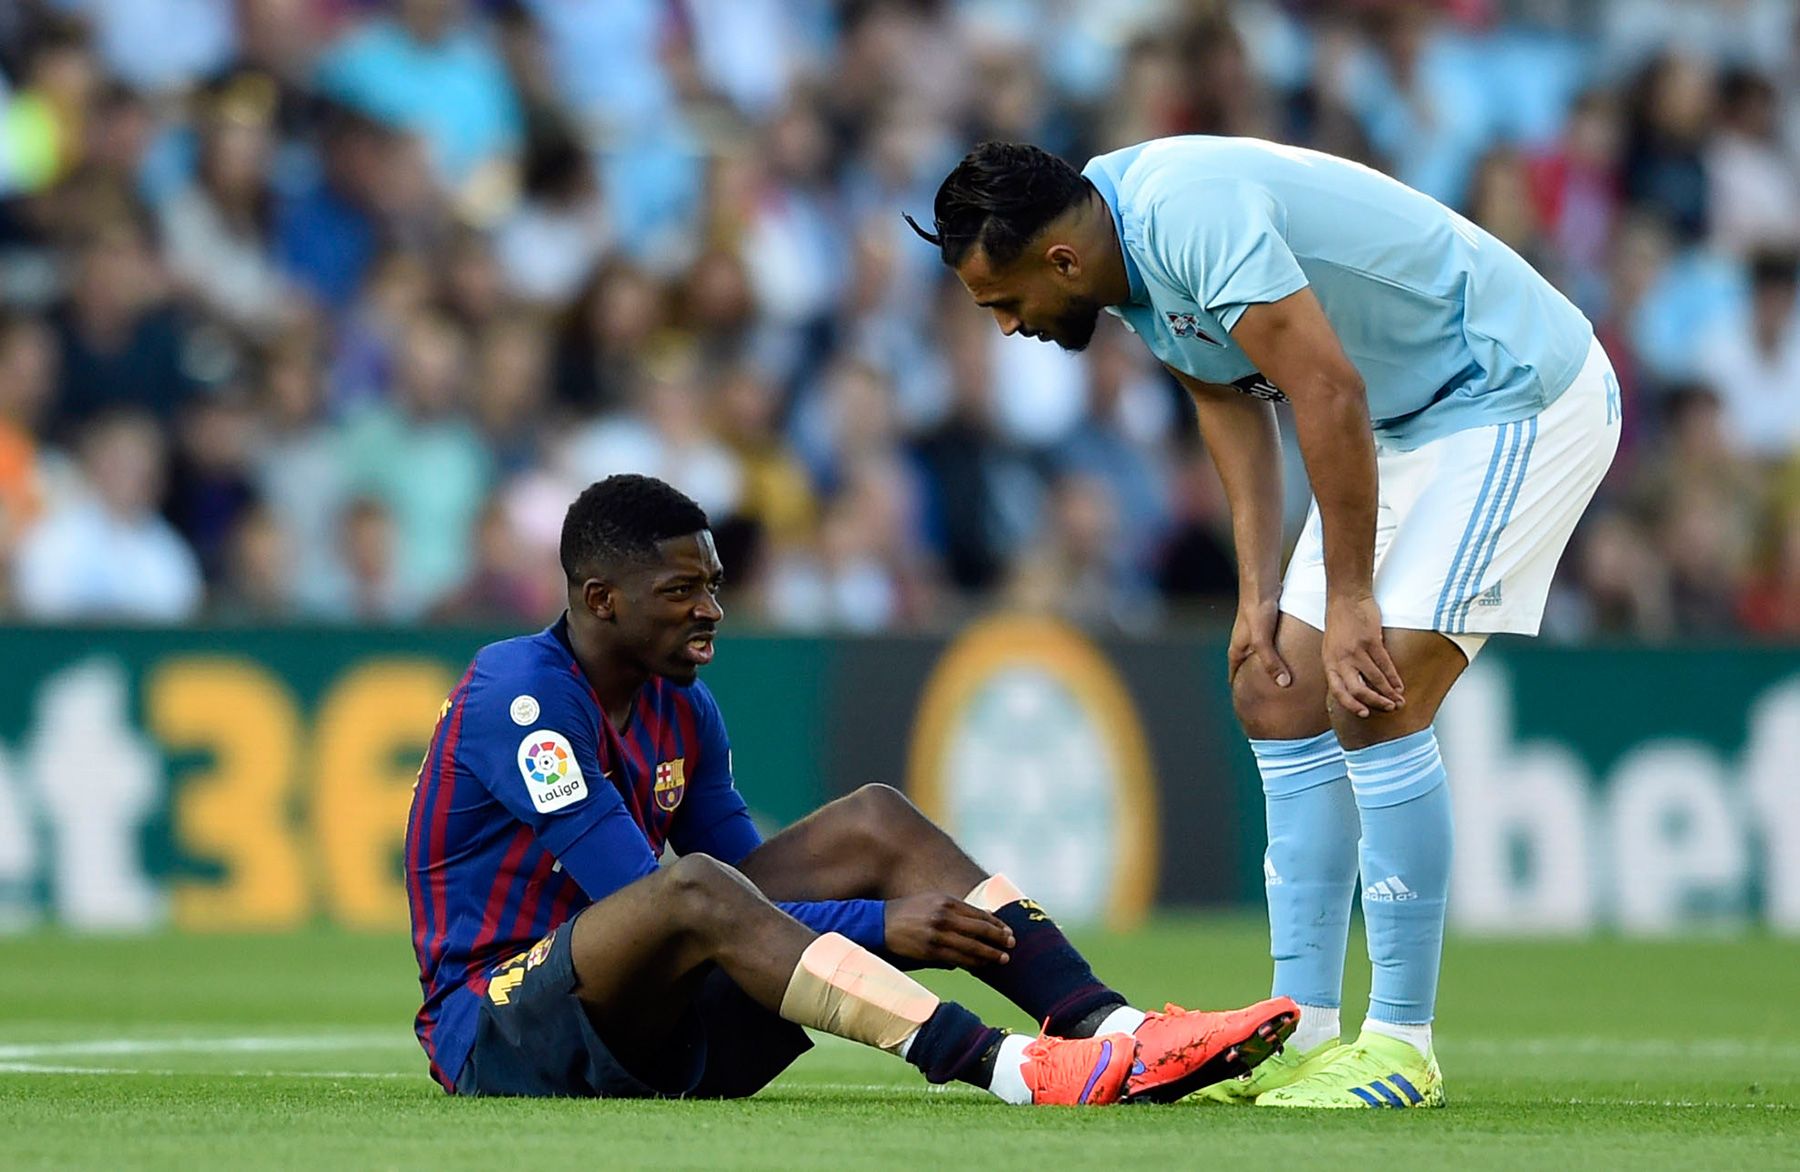 Dembélé is suffering from his injury against Celta